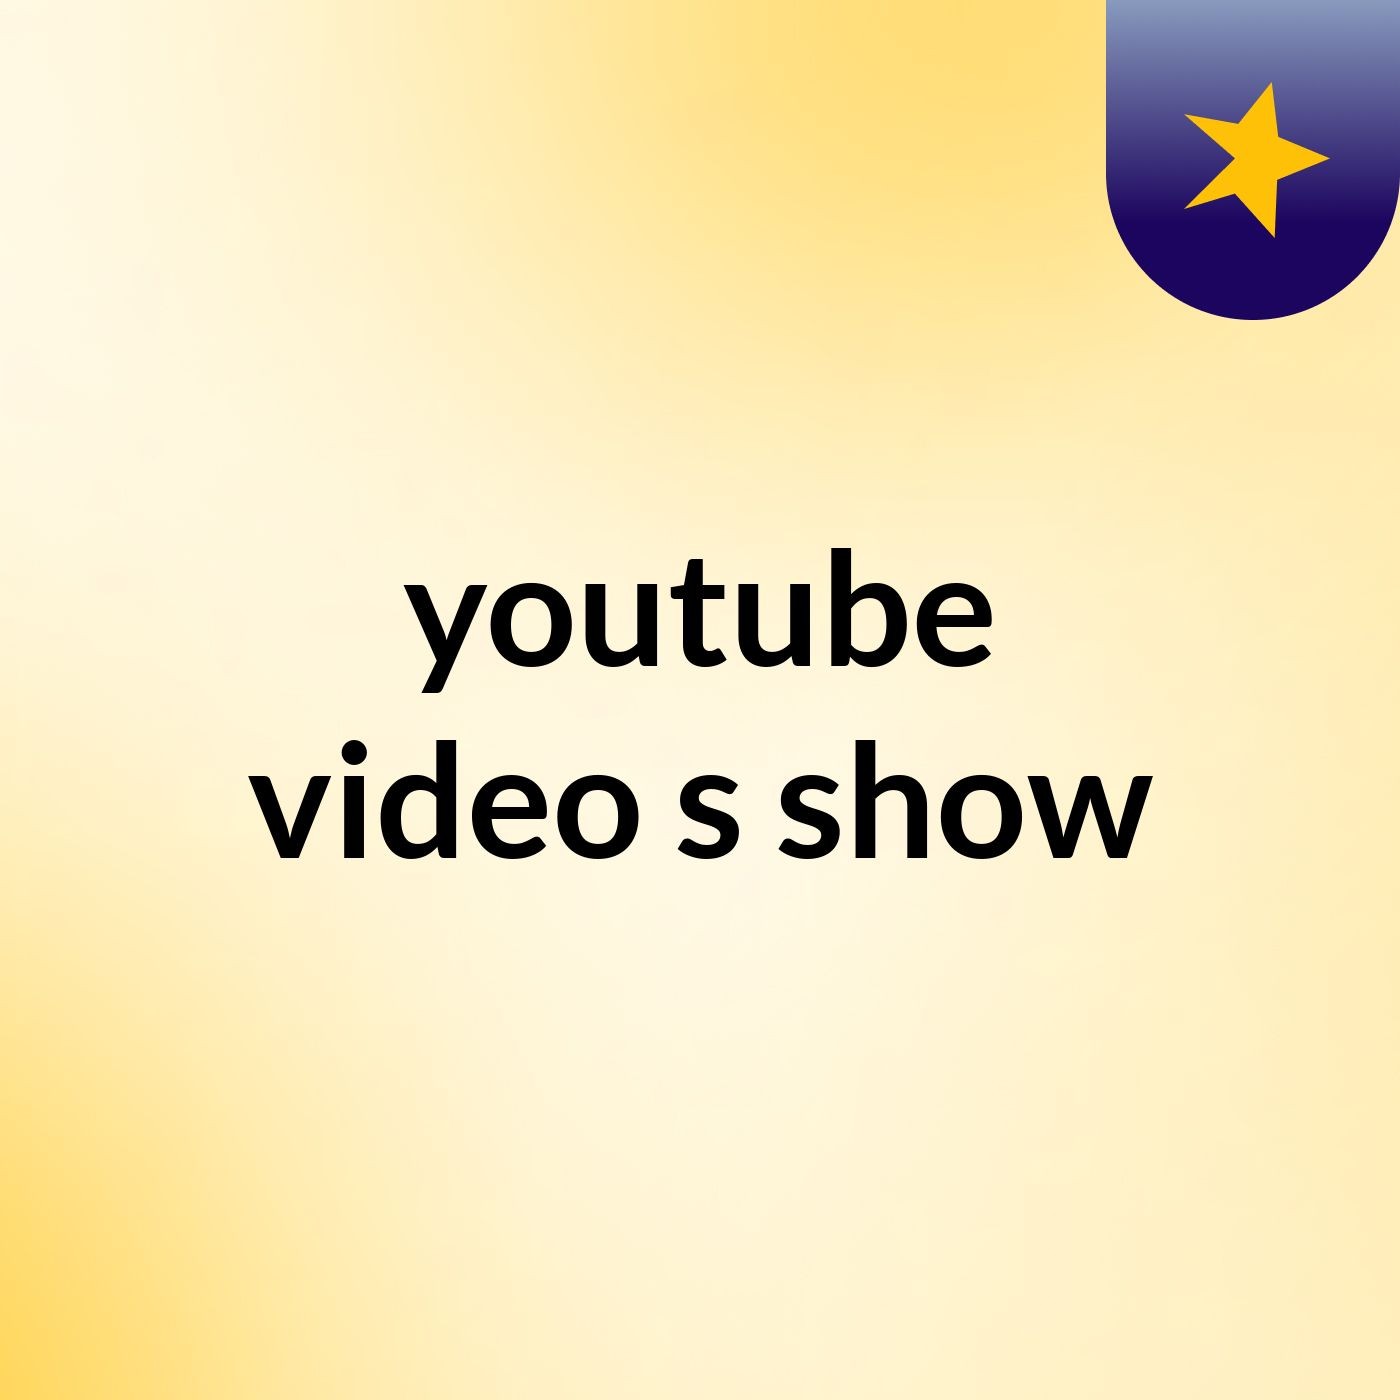 youtube video's show